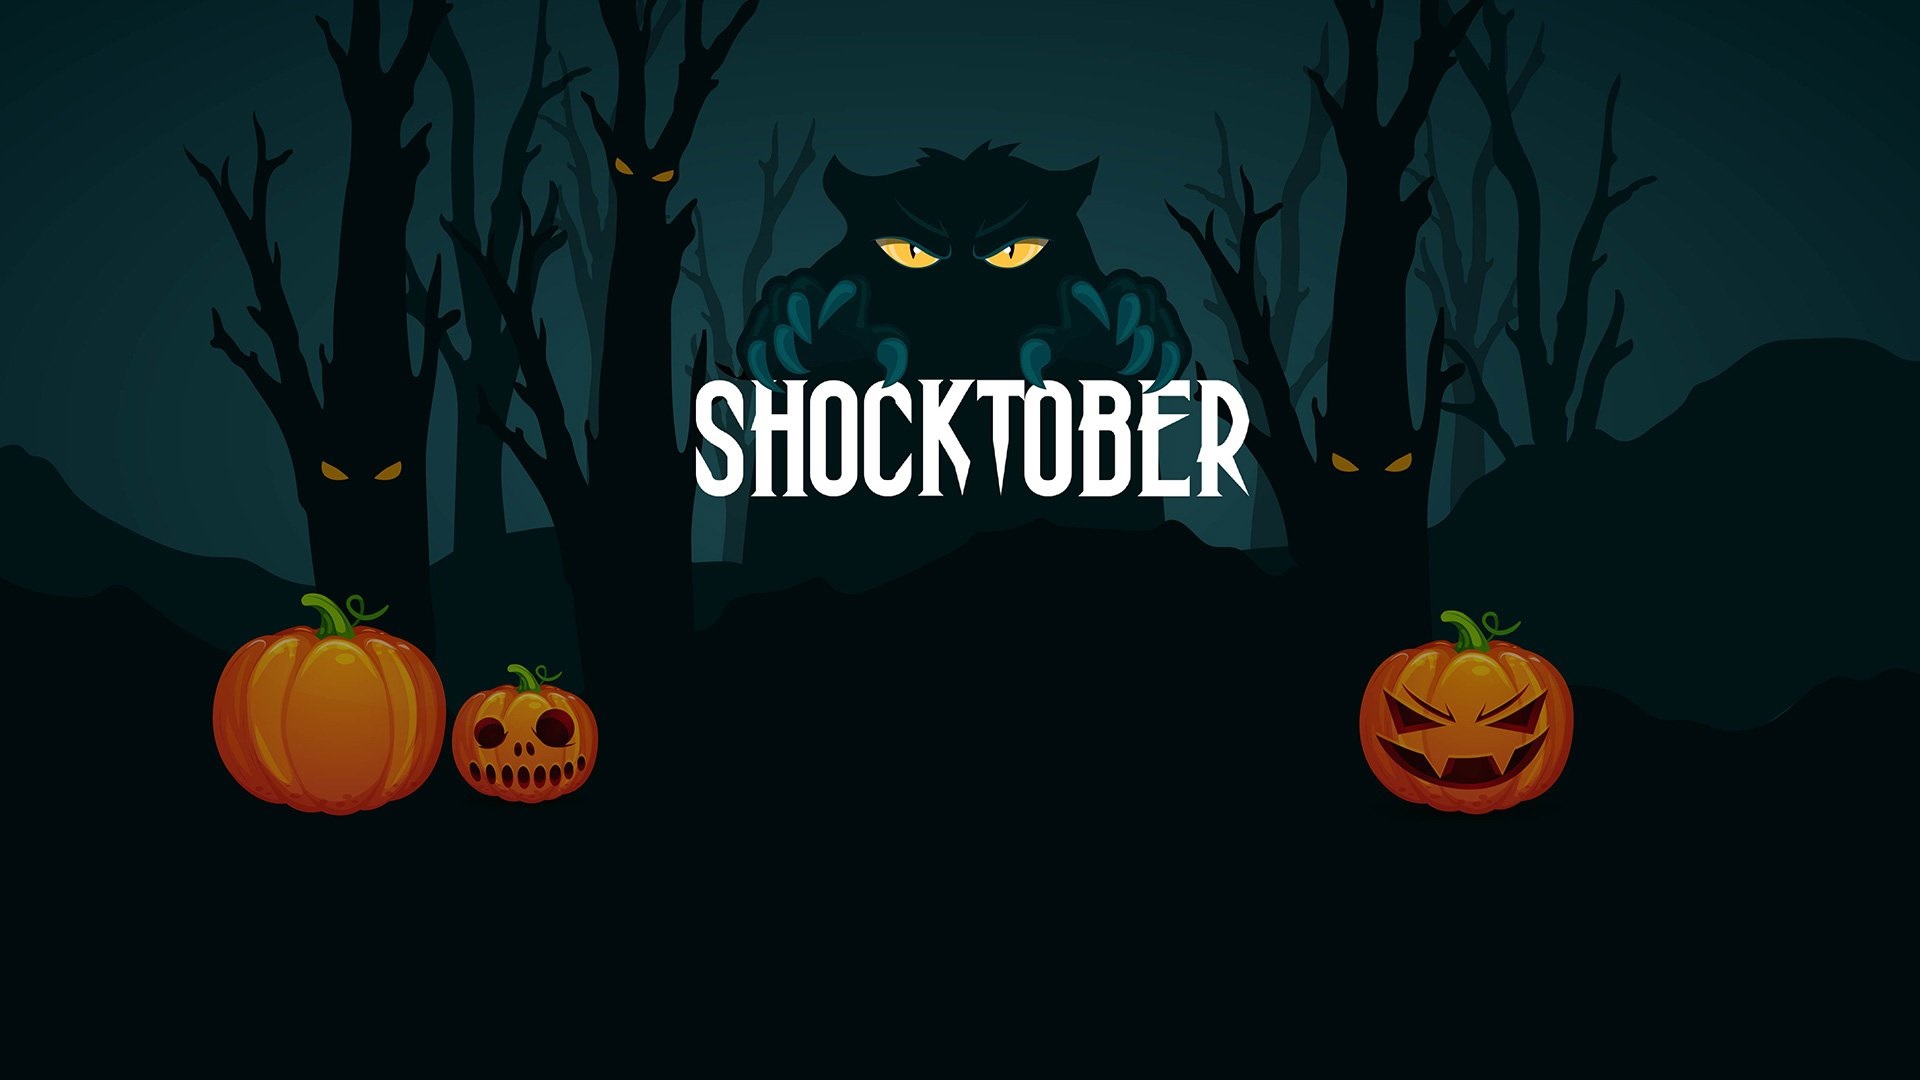 Xbox’s Shocktober Sale brings with it some great gaming deals